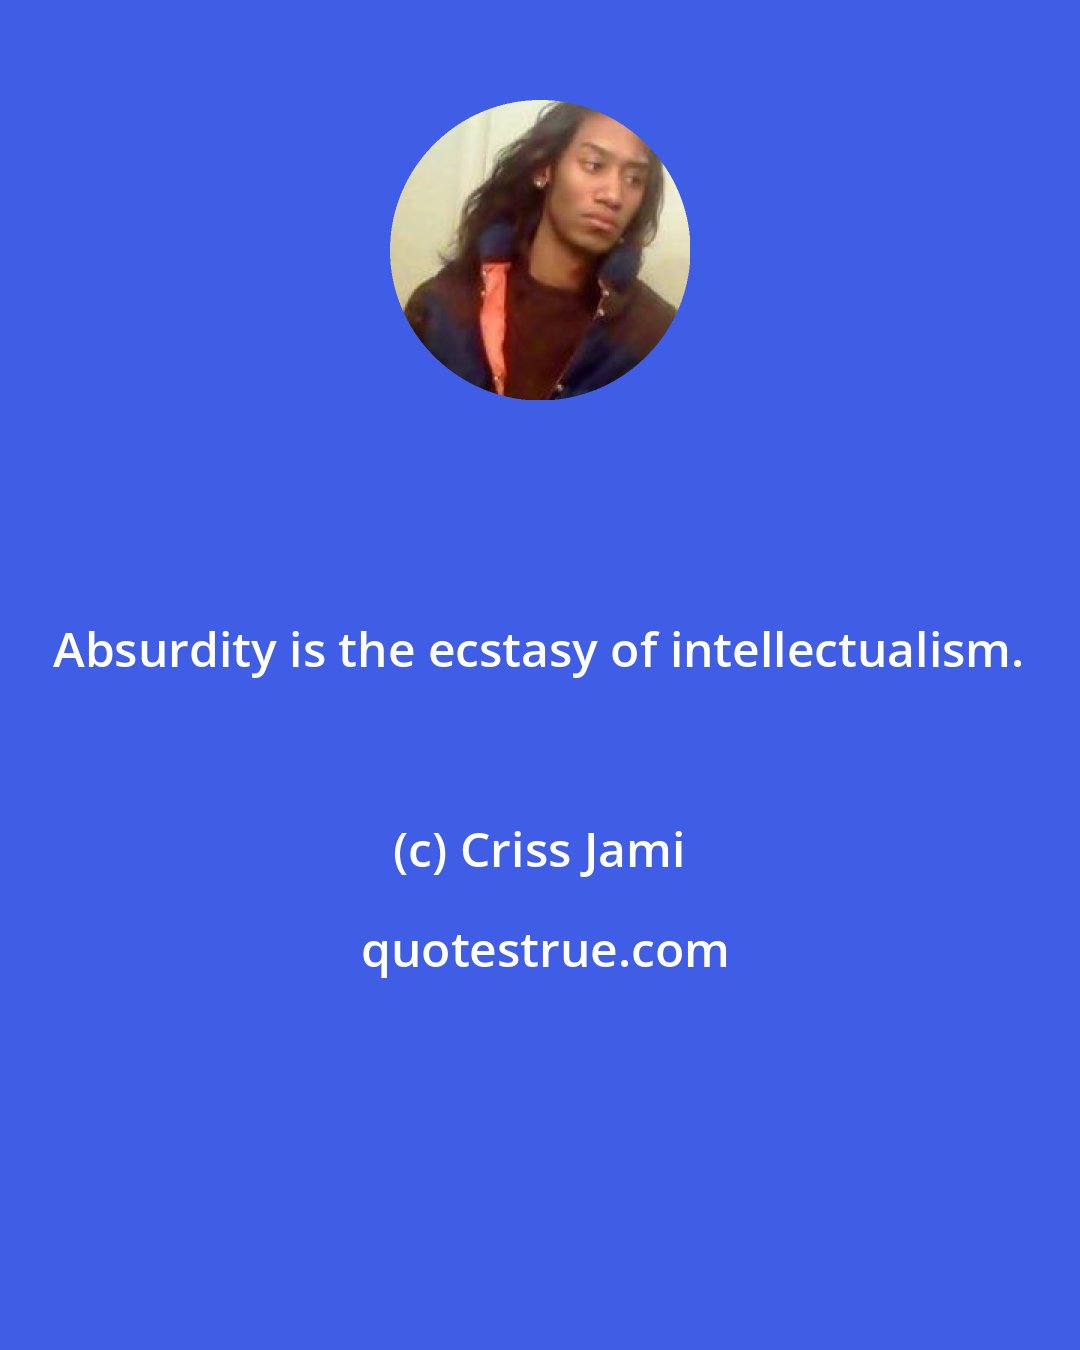 Criss Jami: Absurdity is the ecstasy of intellectualism.